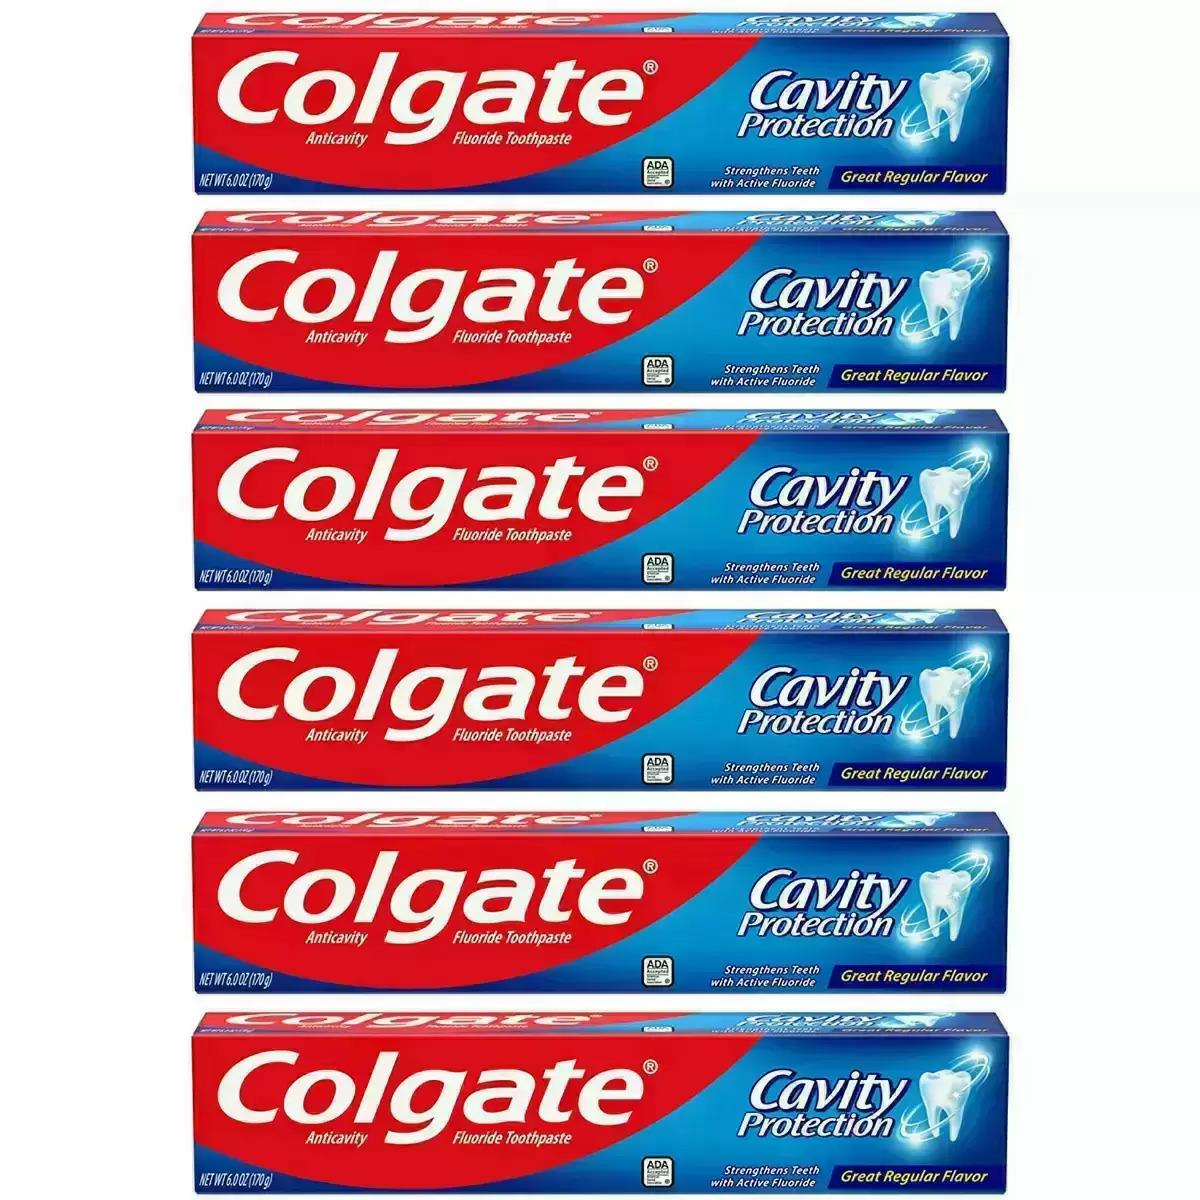 6 Colgate Cavity Protection Toothpaste with Fluoride for $6.33 Shipped